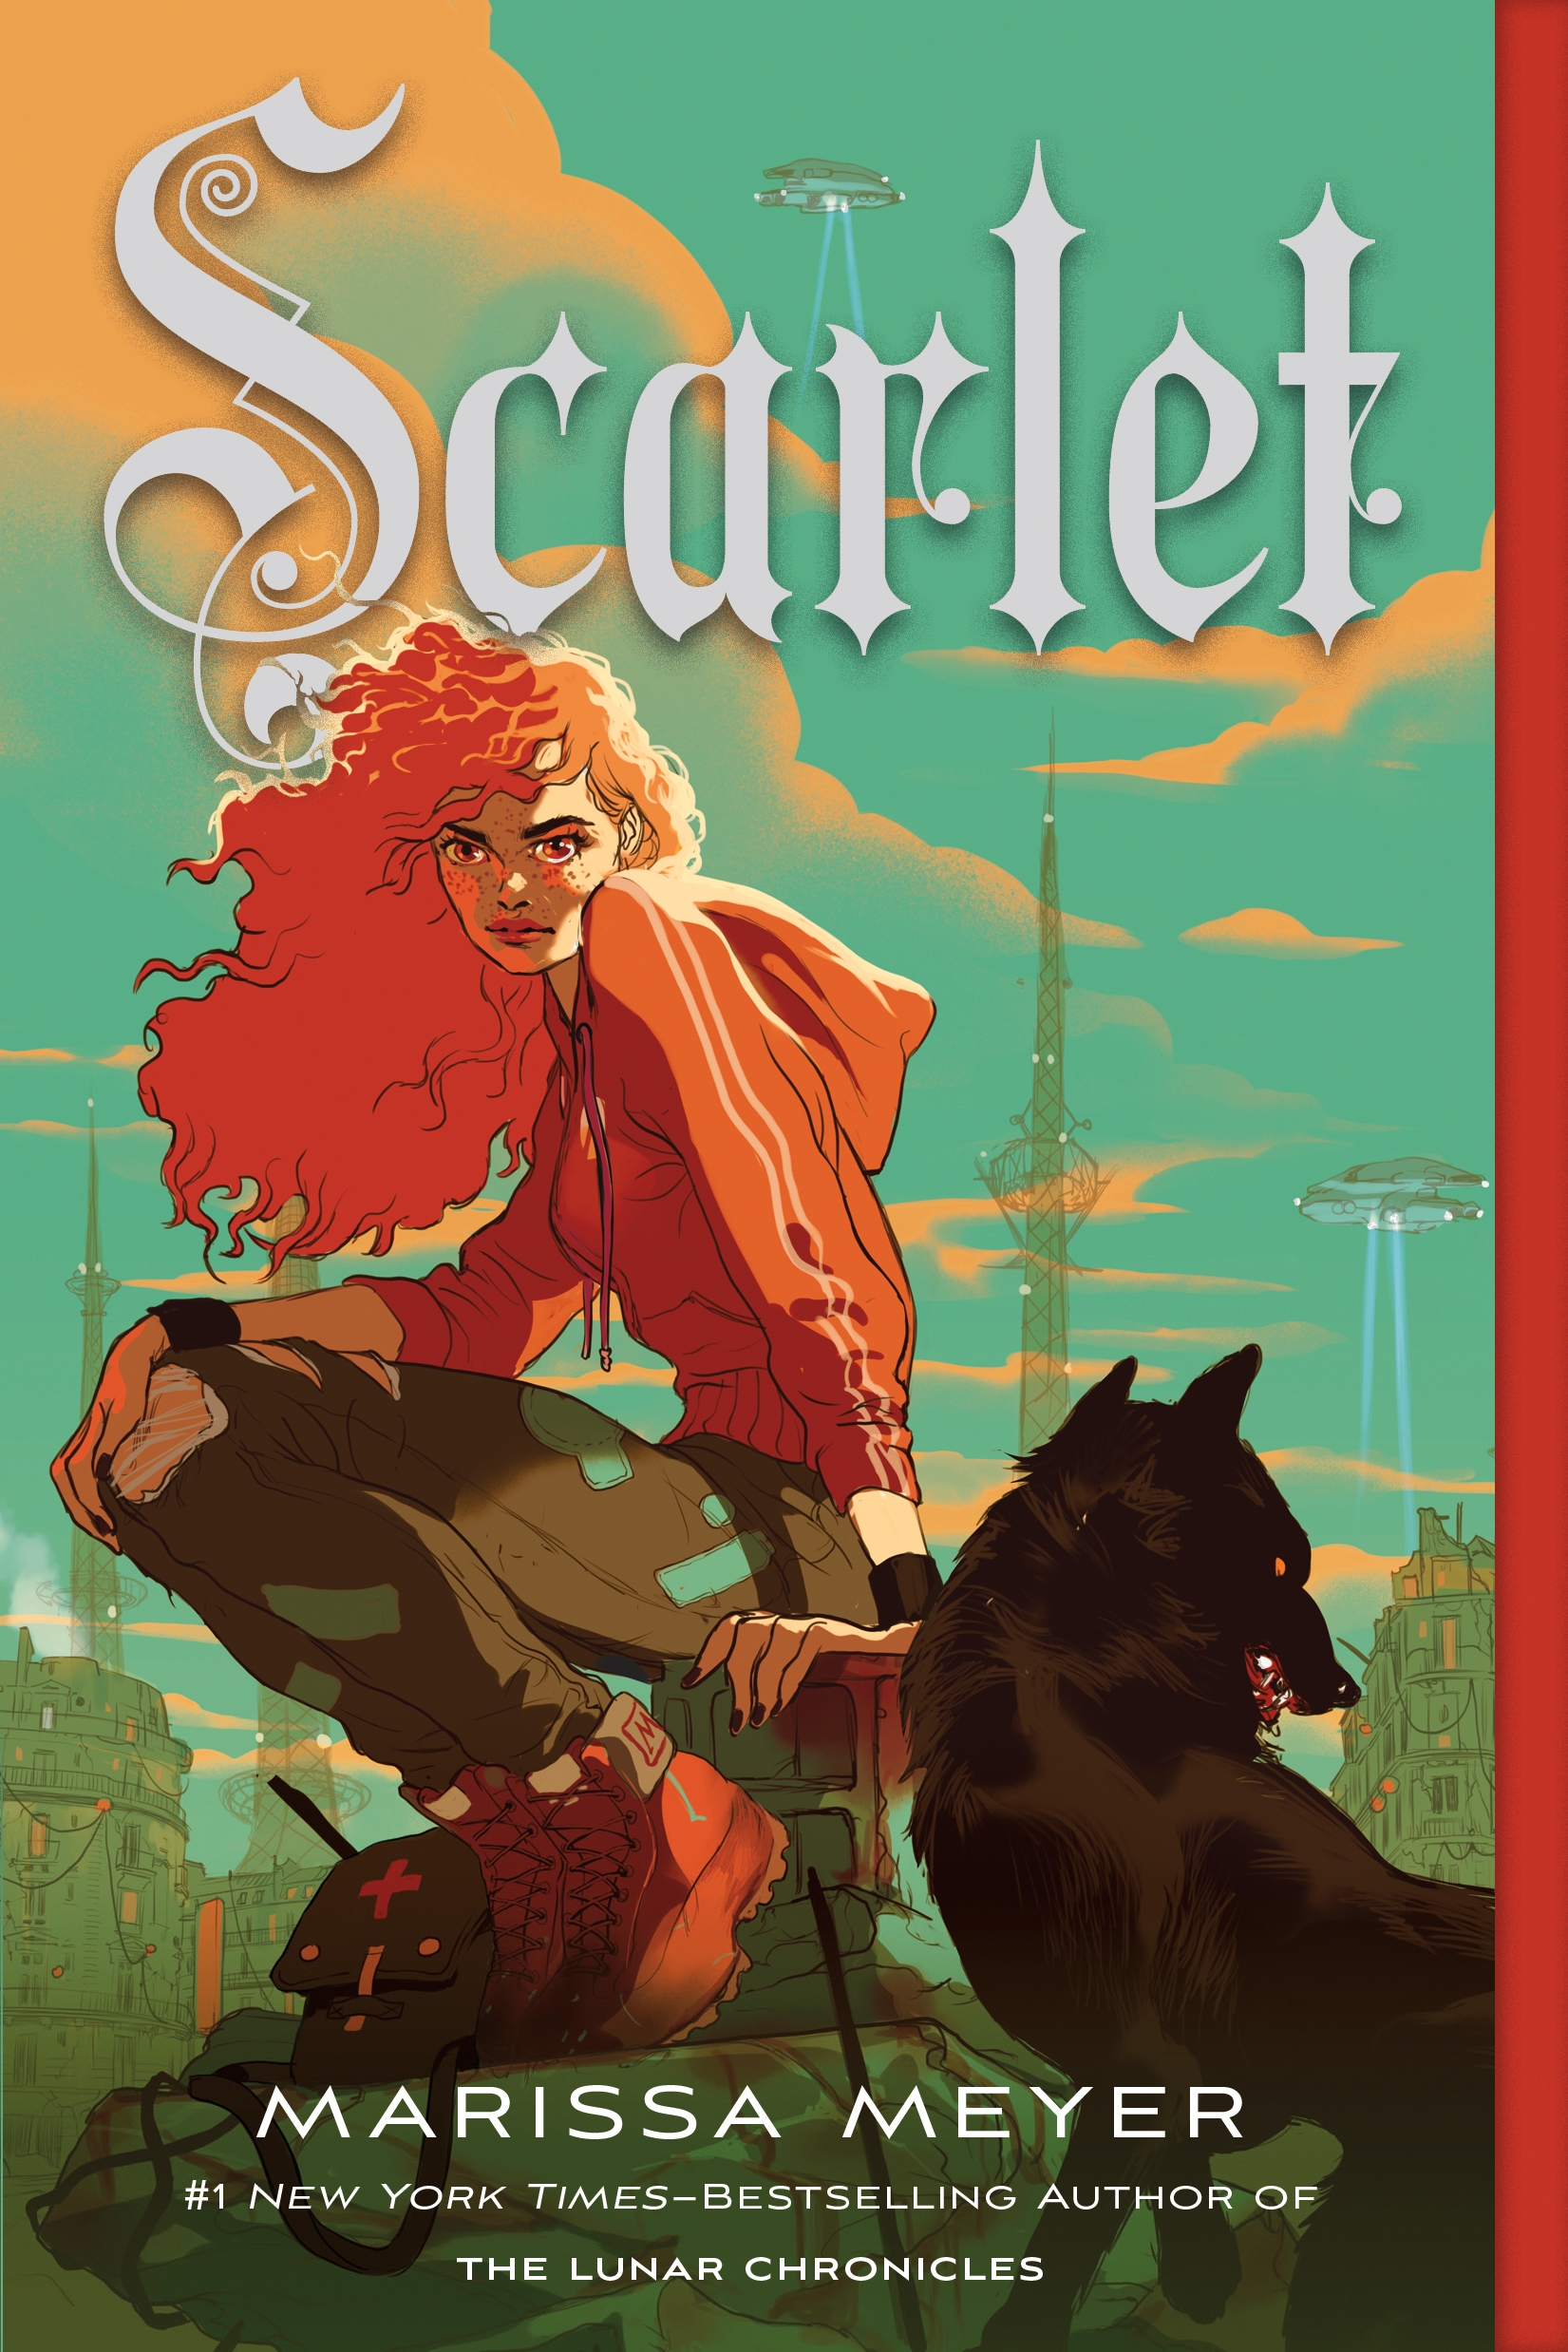 Scarlet cover image